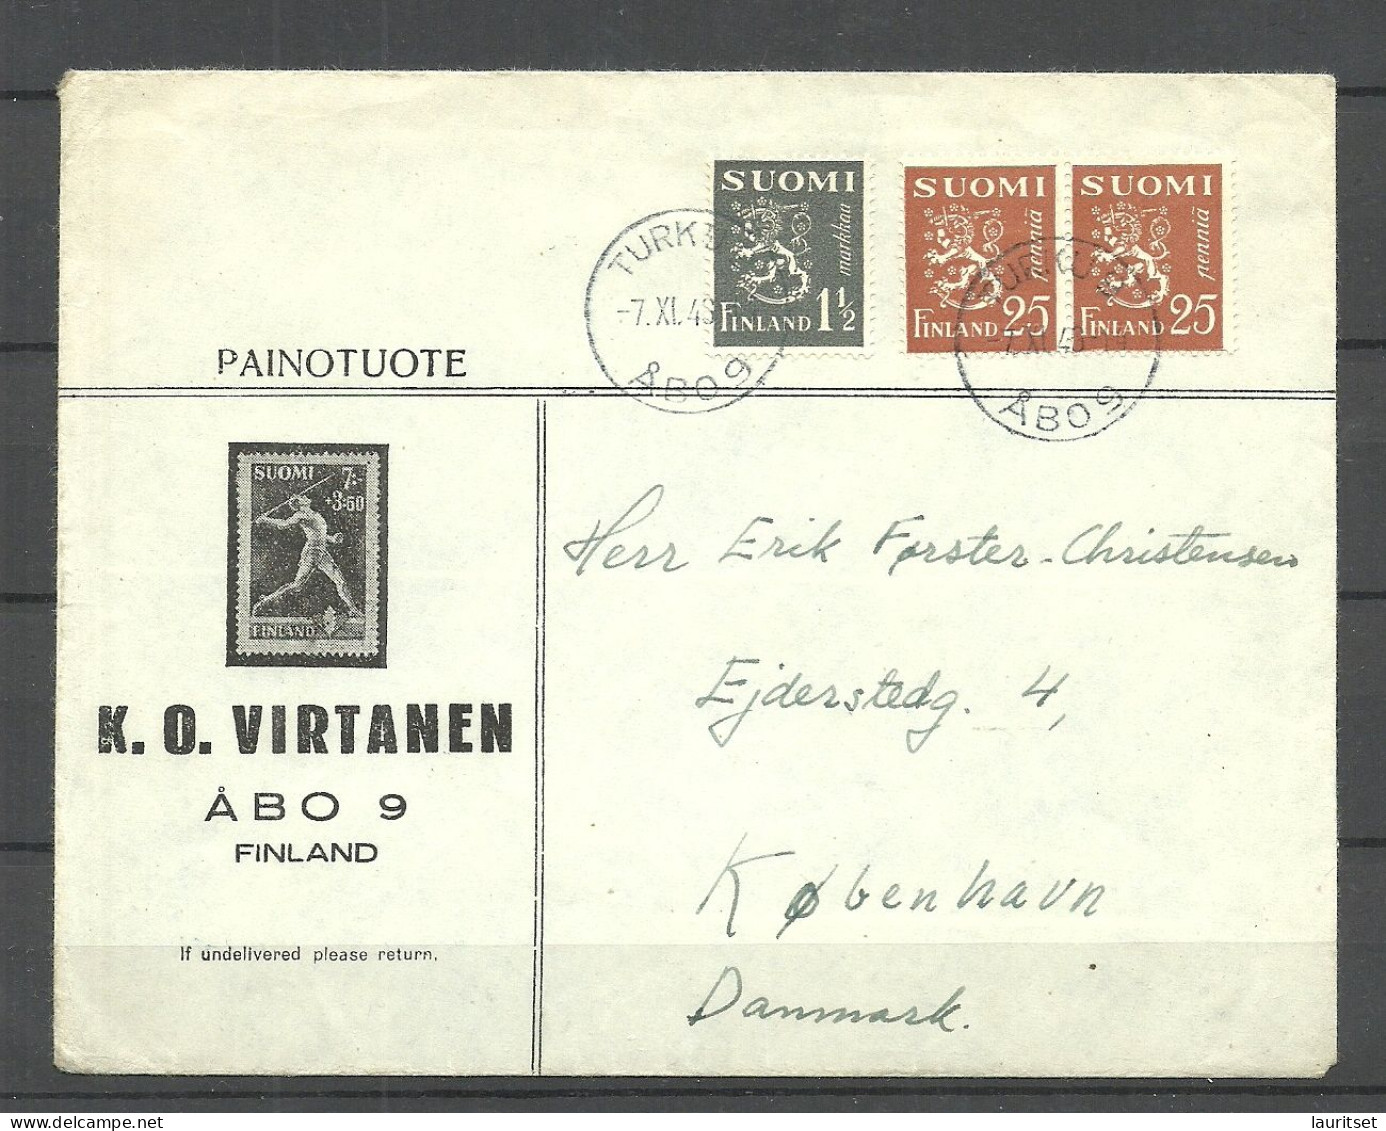 FINLAND FINNLAND Suomi 1948 O Turku 9 Commercial Cover Printed Matter To Denmark - Covers & Documents